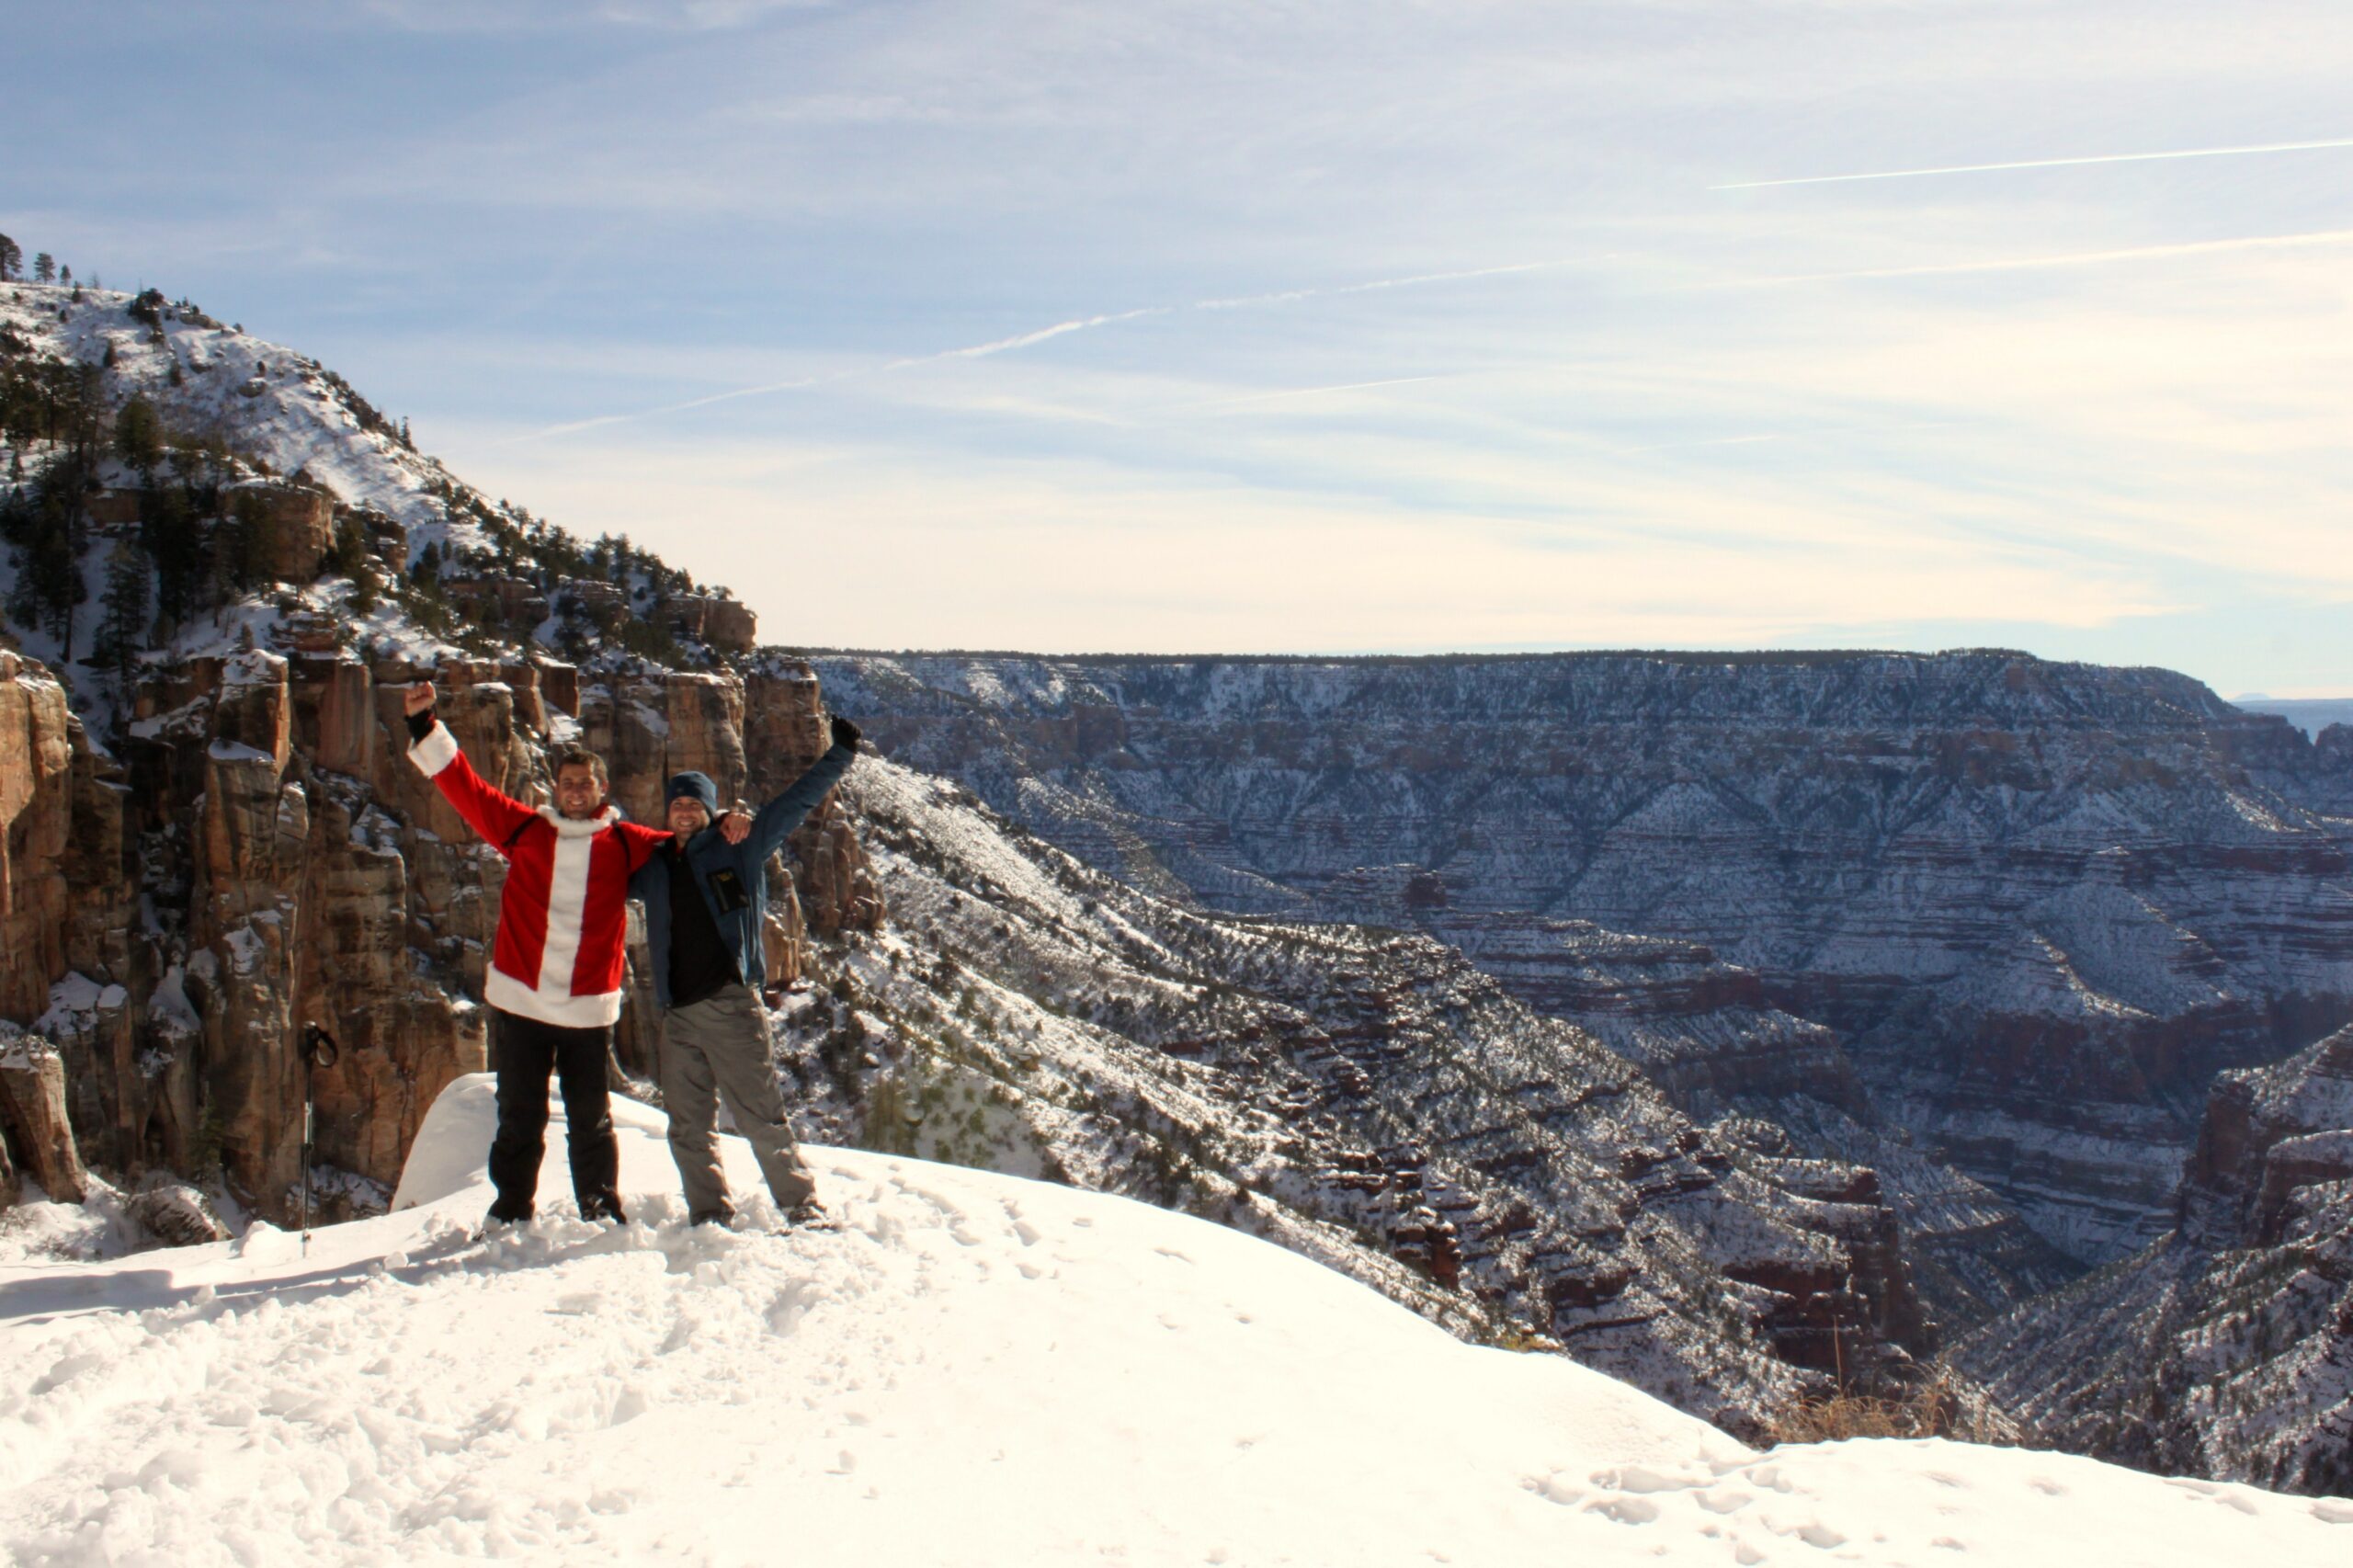 Santa Claus (a.k.a. Hank) and Brian celebrate on the Grand Canyon's North Rim.